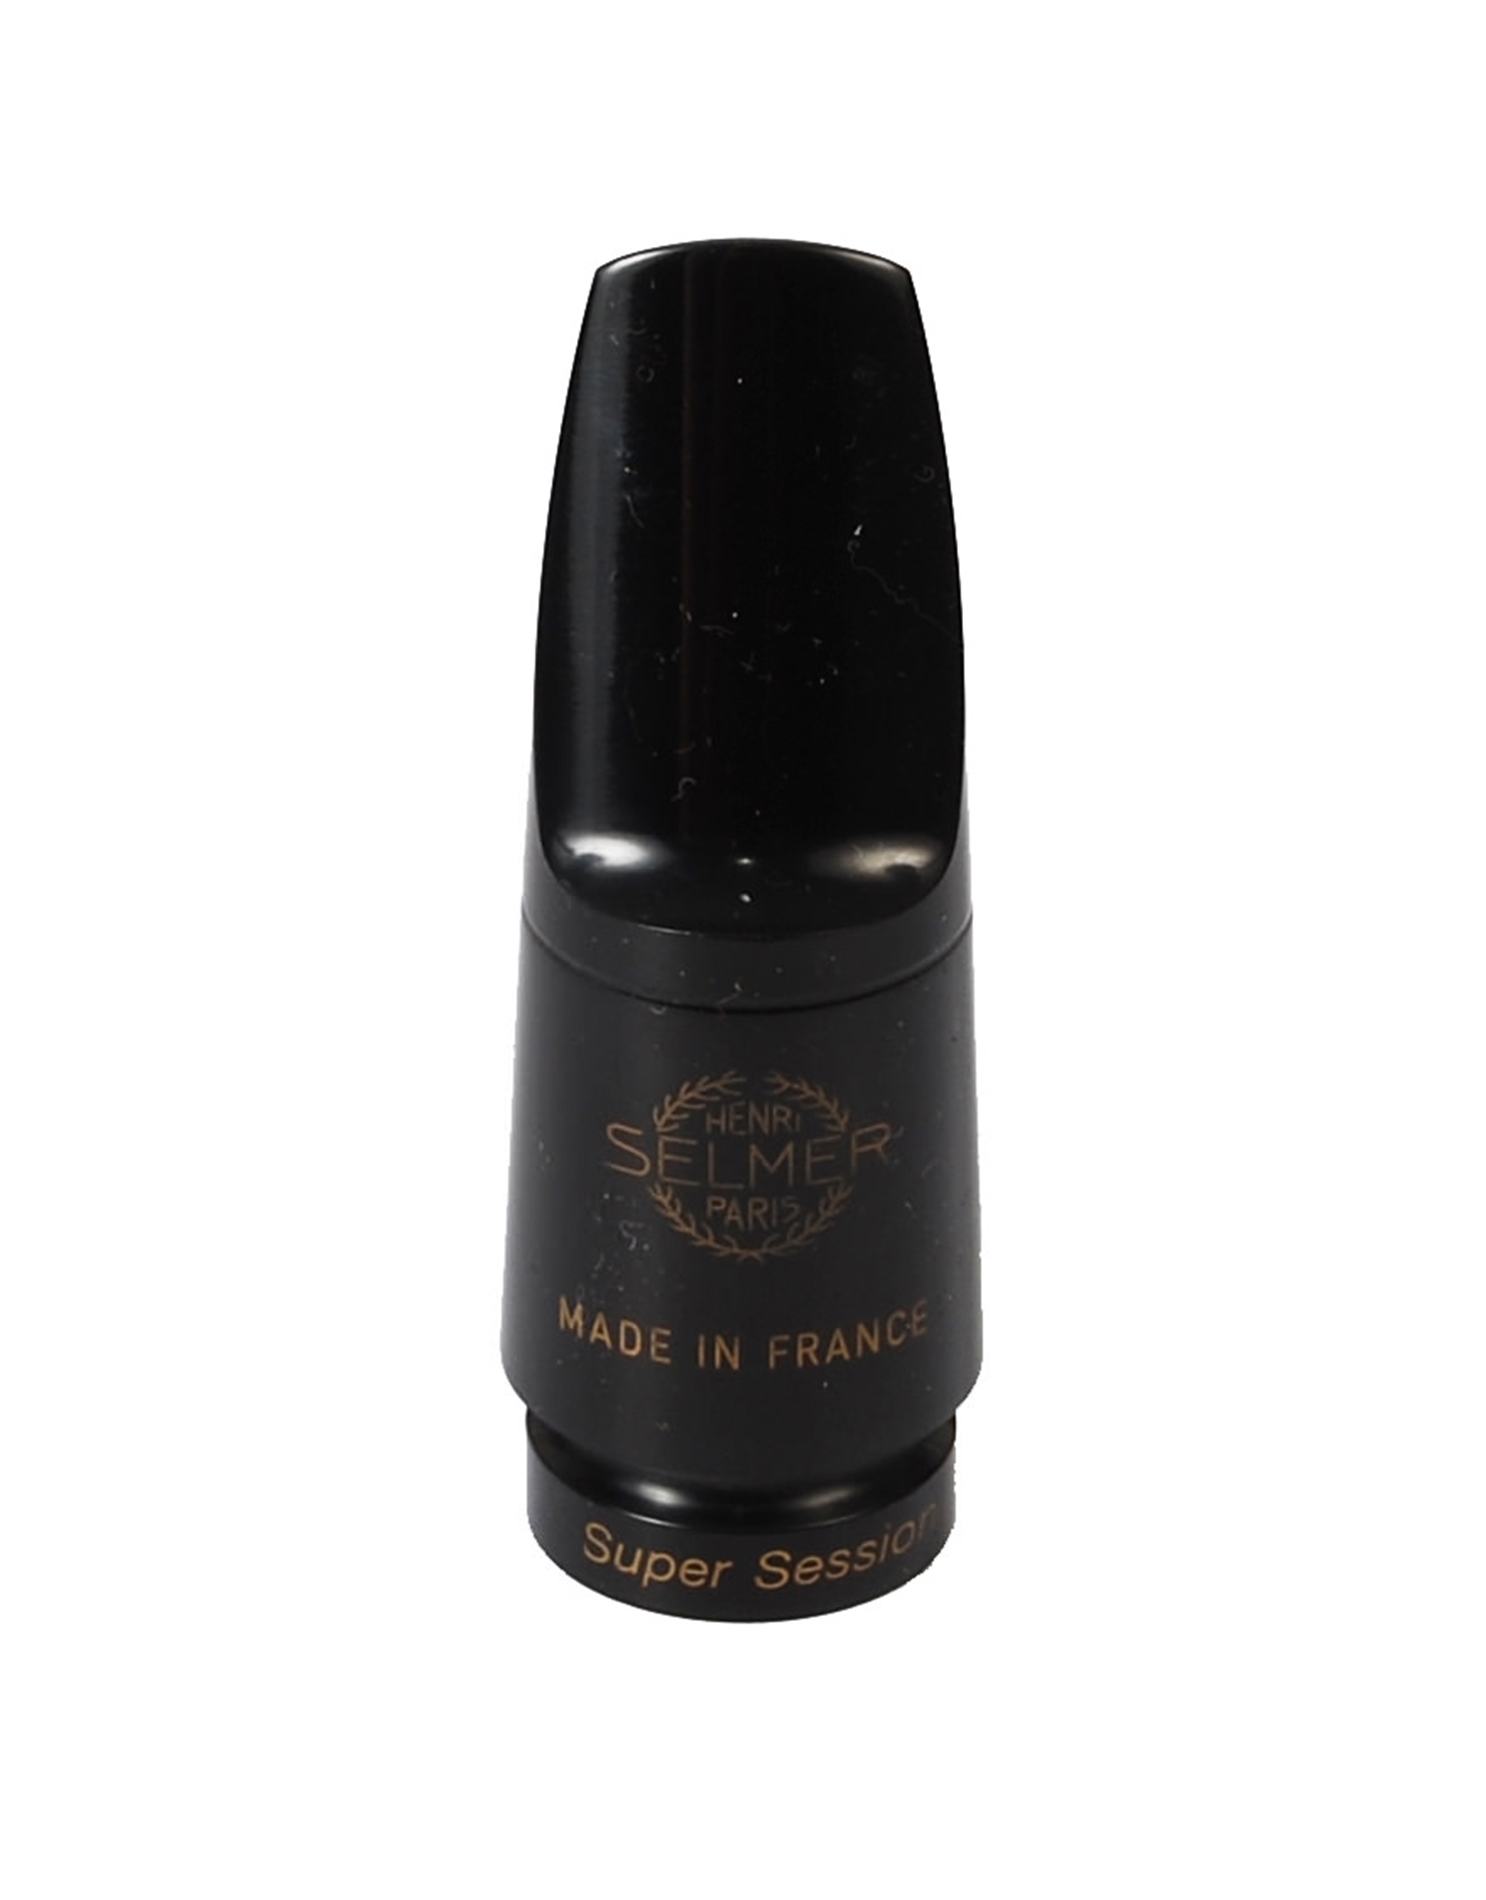 SELMER Super Session F NU Mouthpiece for Soprano Saxophone Mouth Pieces  Nakas Music Cyprus